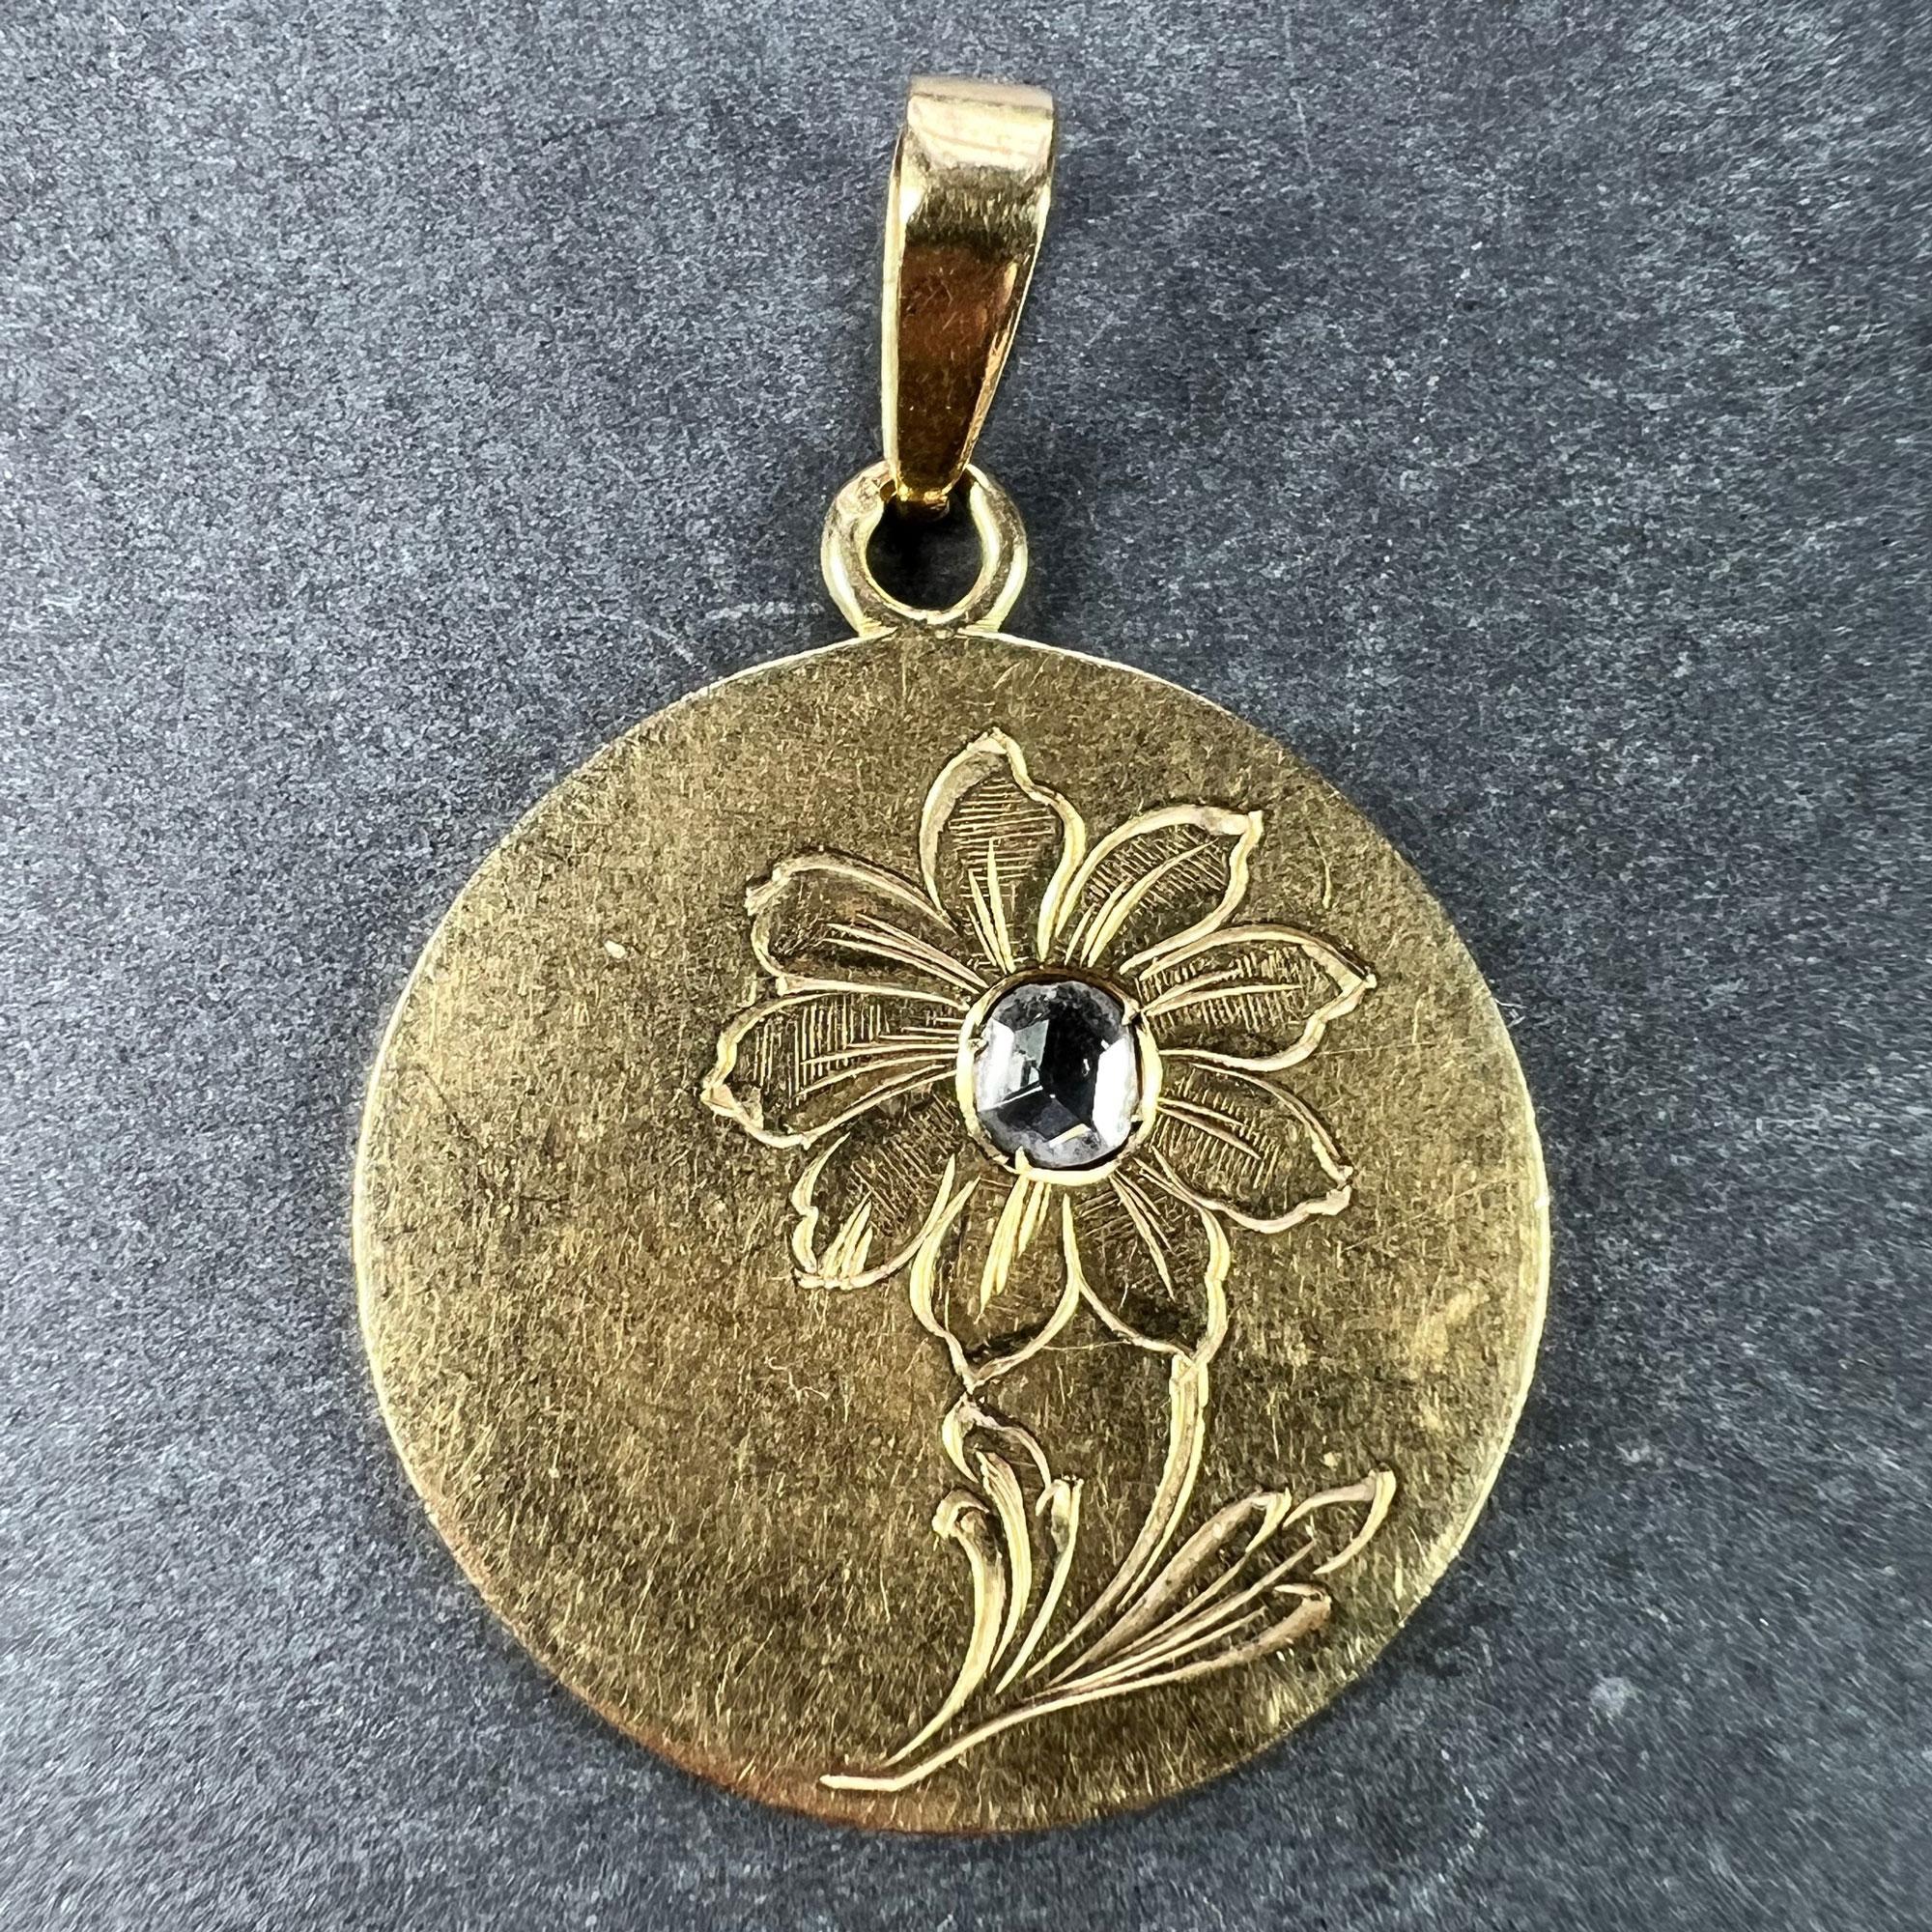 A French 18 karat (18K) yellow gold charm pendant designed as a disc with an engraved daisy or margherite flower set to the centre with a rose-cut diamond weighing approximately 0.10 carats. Stamped with the French import mark for 18 karat gold to